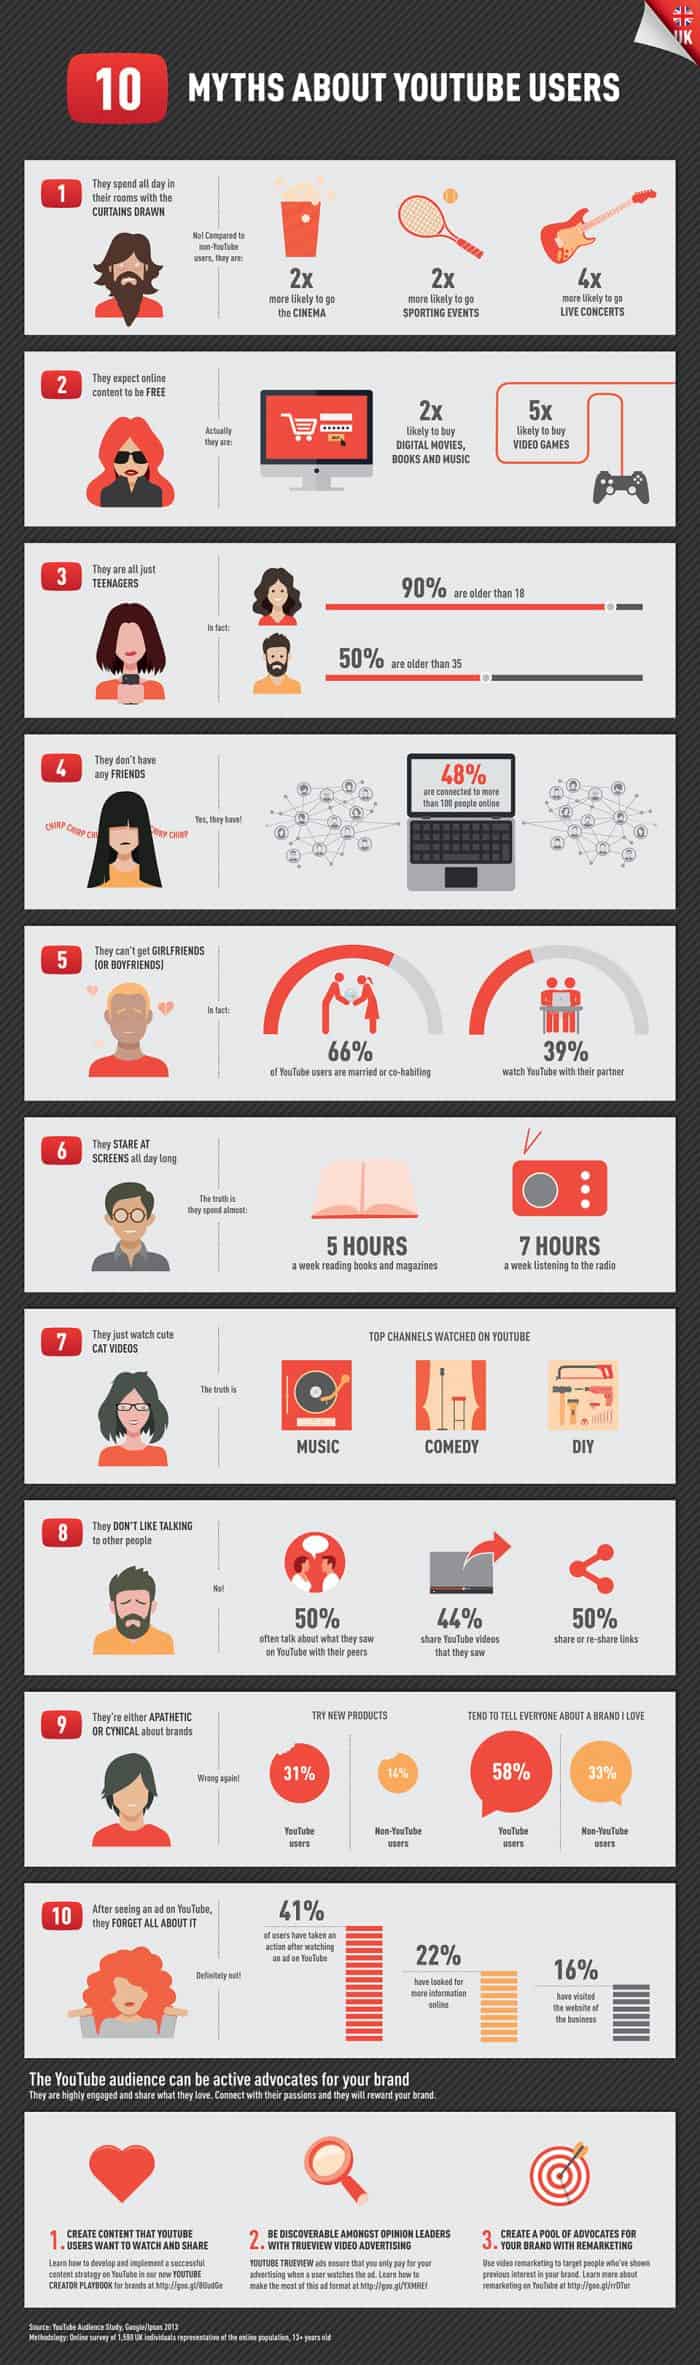 10 Myths about YouTube Users Infographic